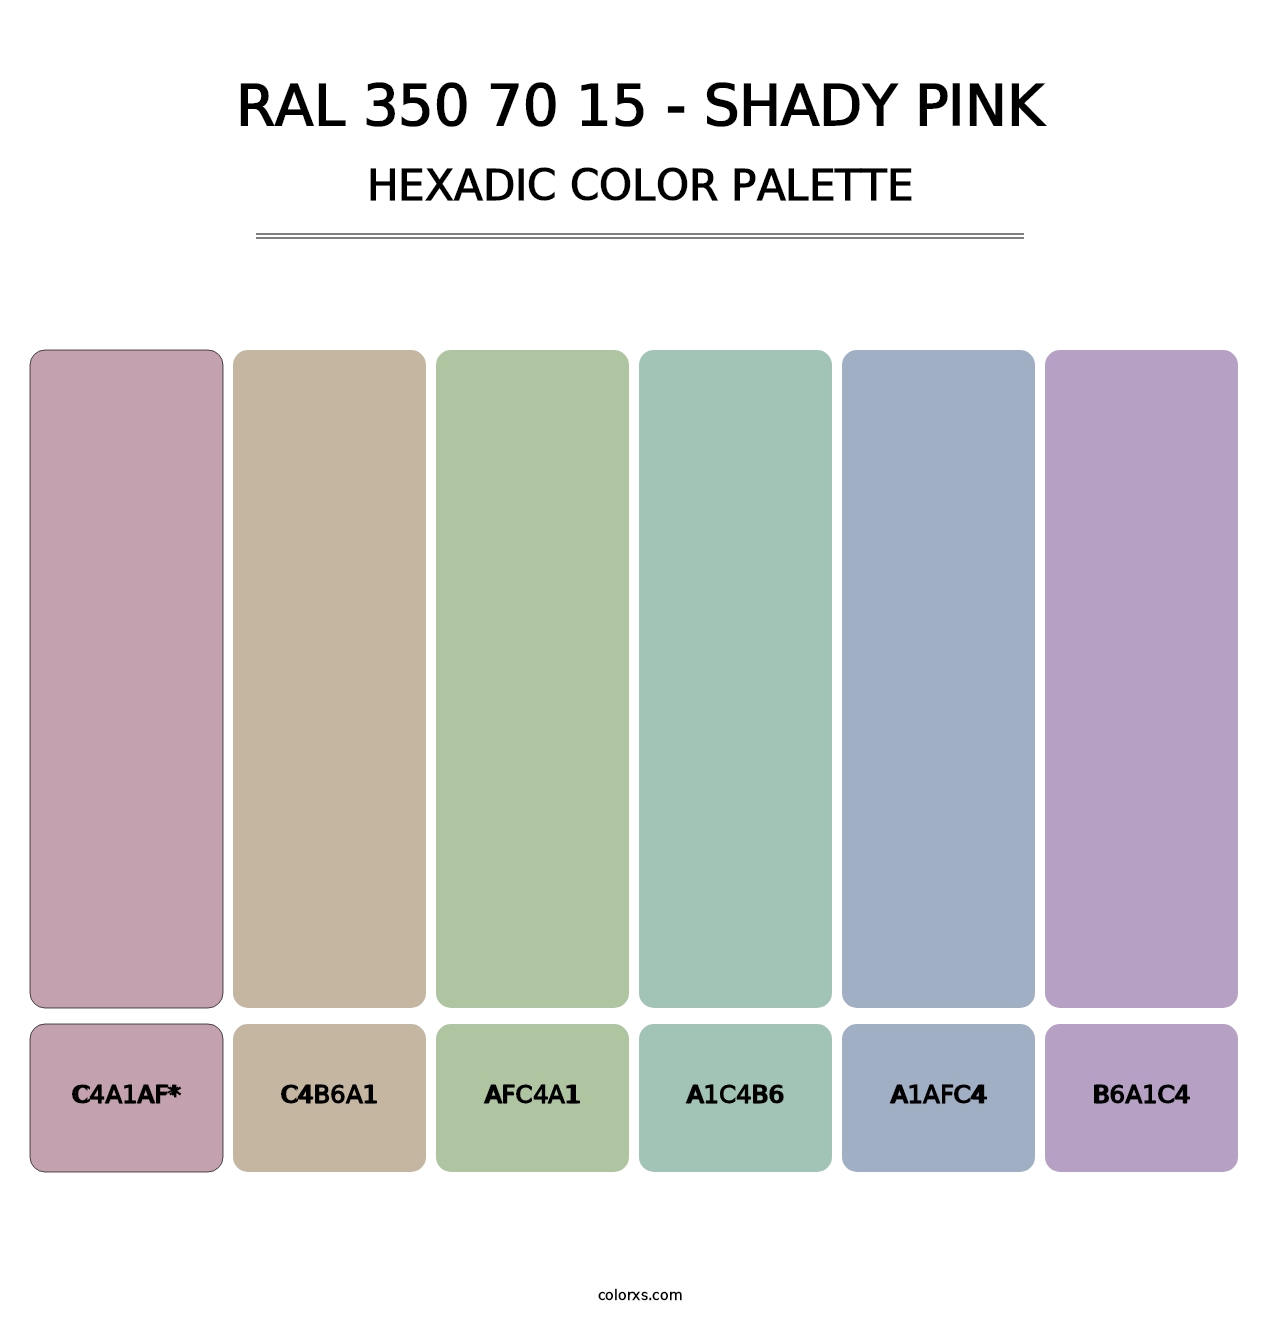 RAL 350 70 15 - Shady Pink - Hexadic Color Palette